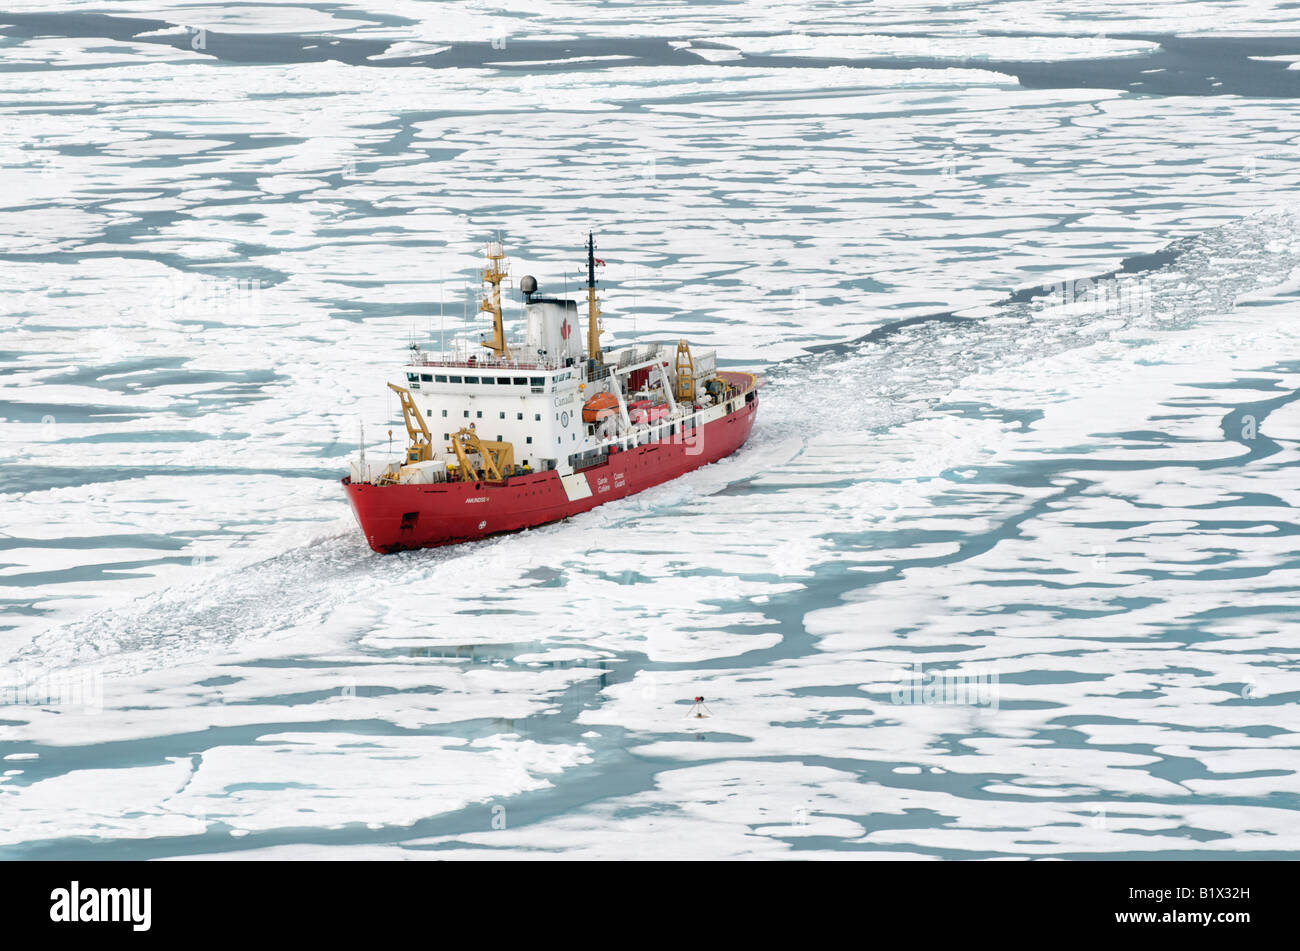 Canadian Coast Guard icebreaker and Arctic research ship CCGS Amundsen.  Seen in the Amundsen Gulf.  Spring time ice. Stock Photo